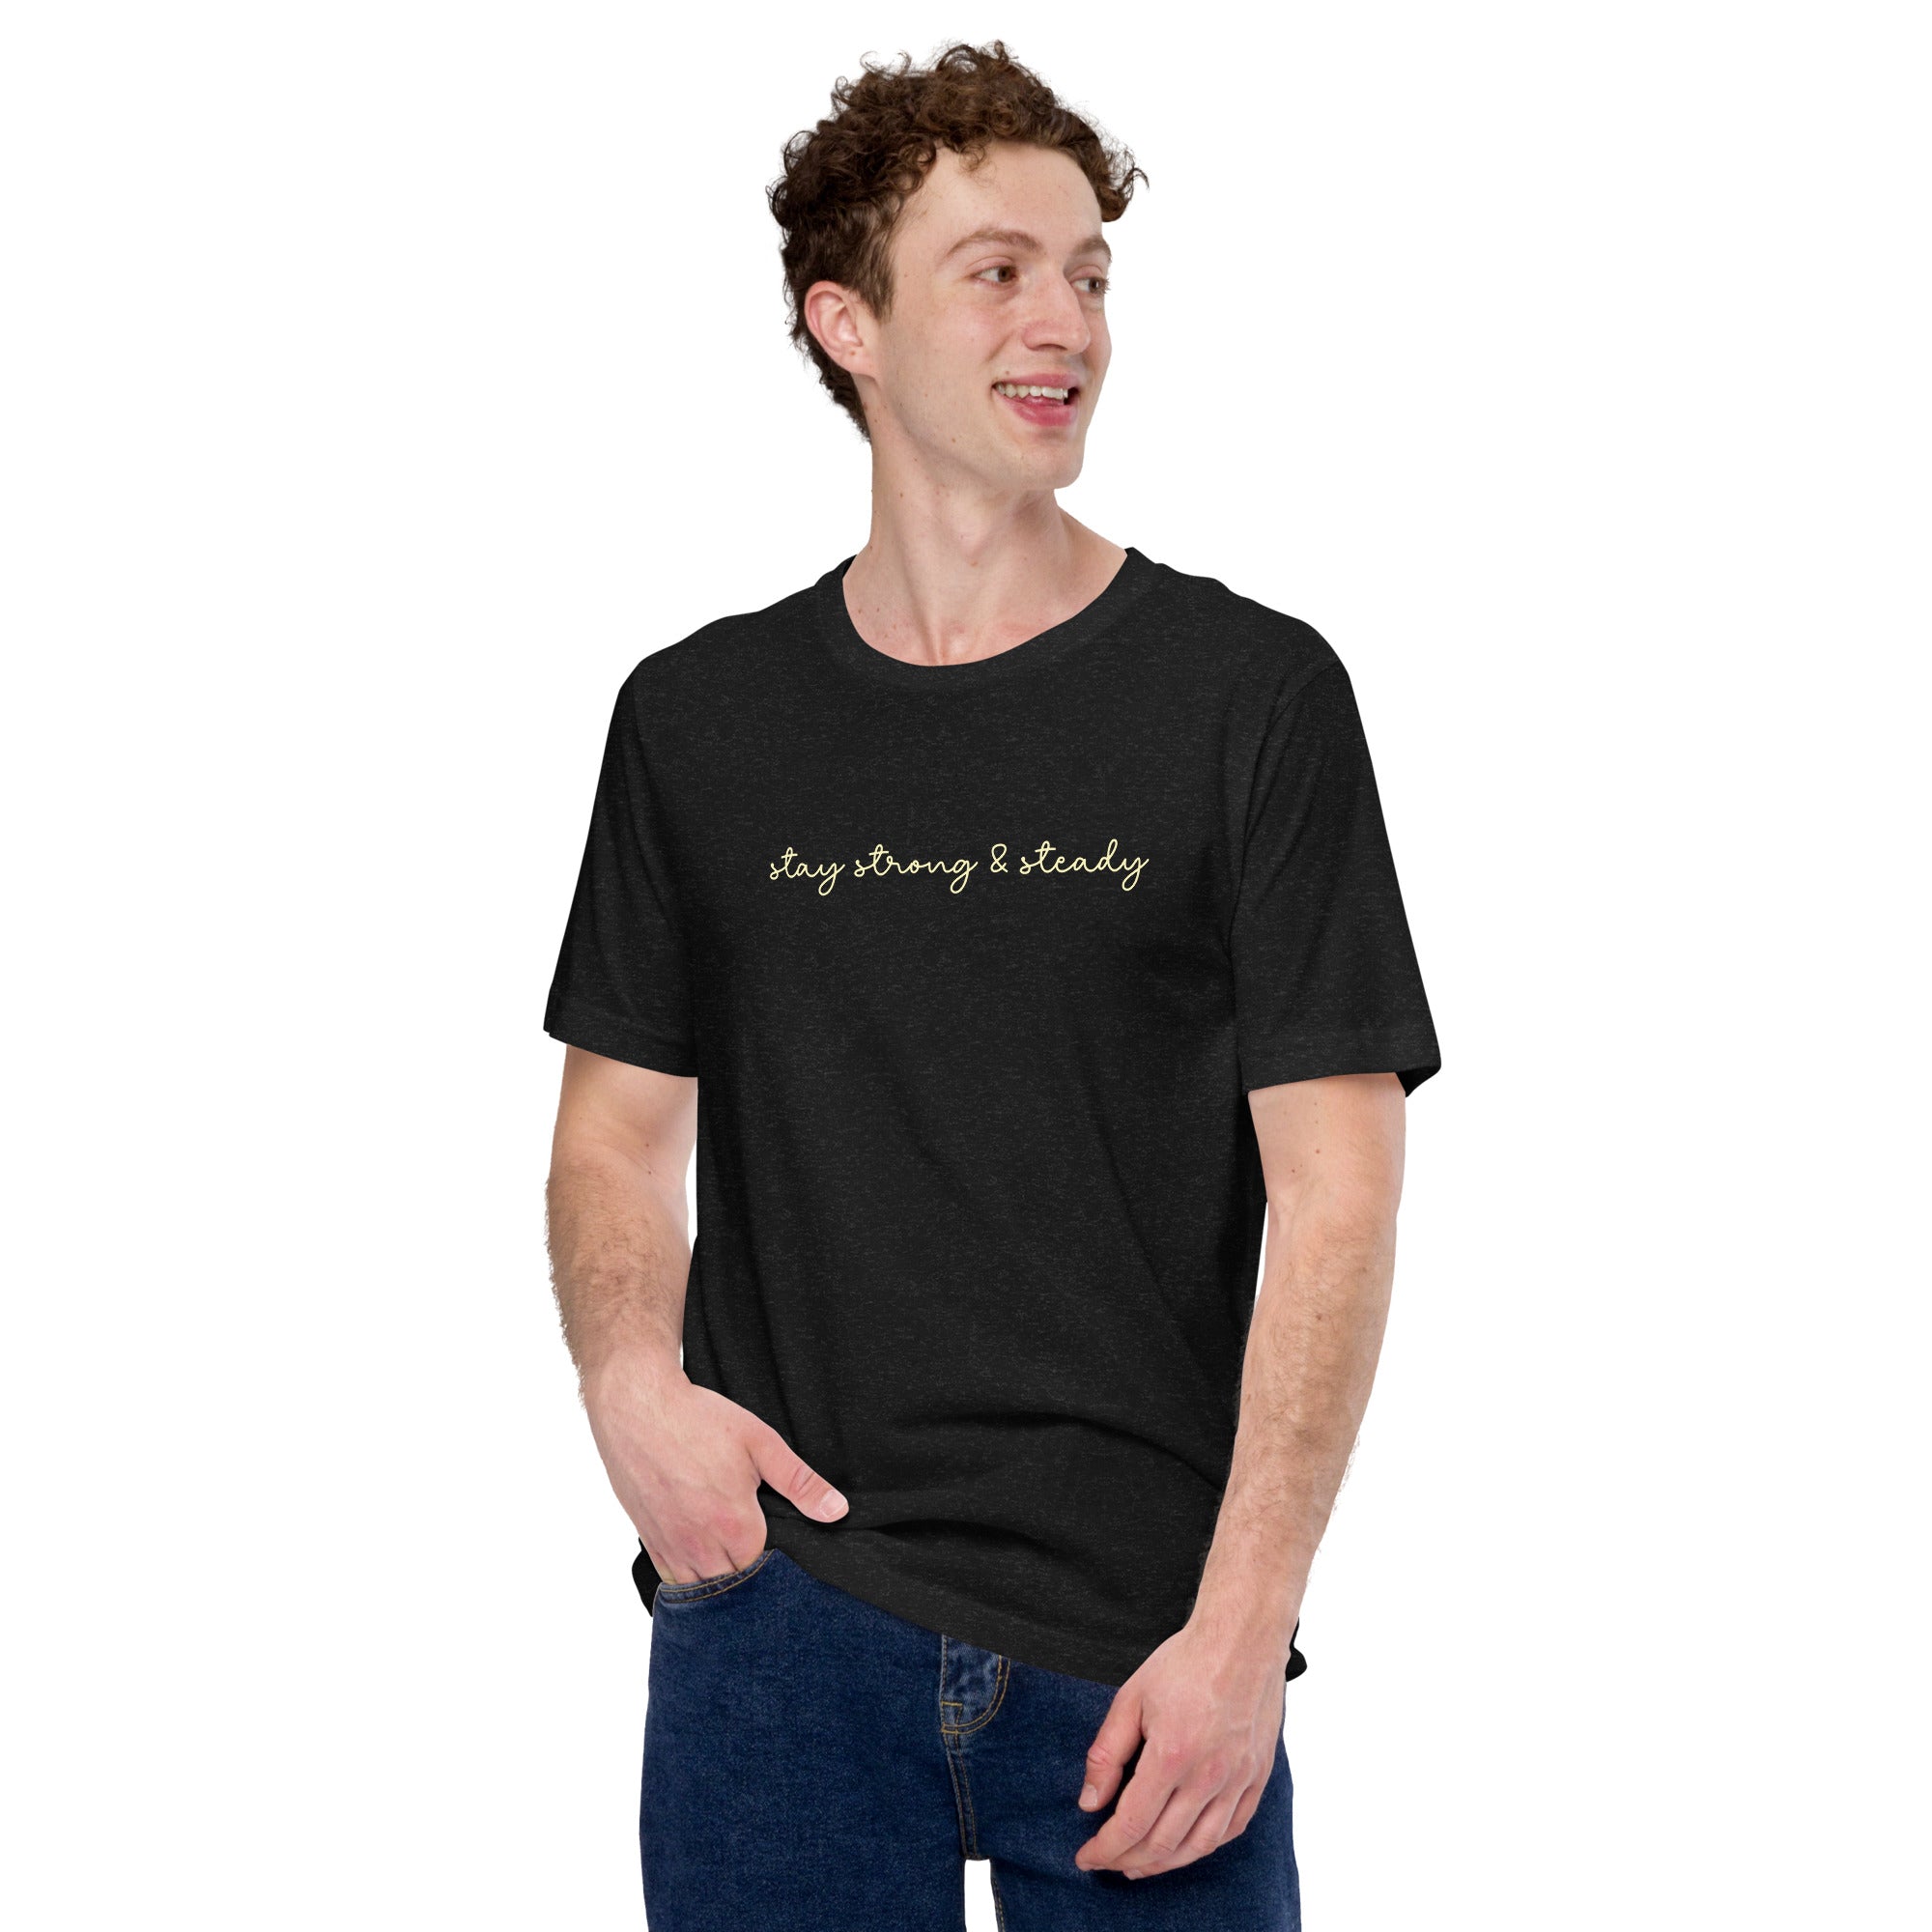 Strong And Steady, Premium Short-Sleeve Unisex T-Shirt | Positive Affirmation Tee